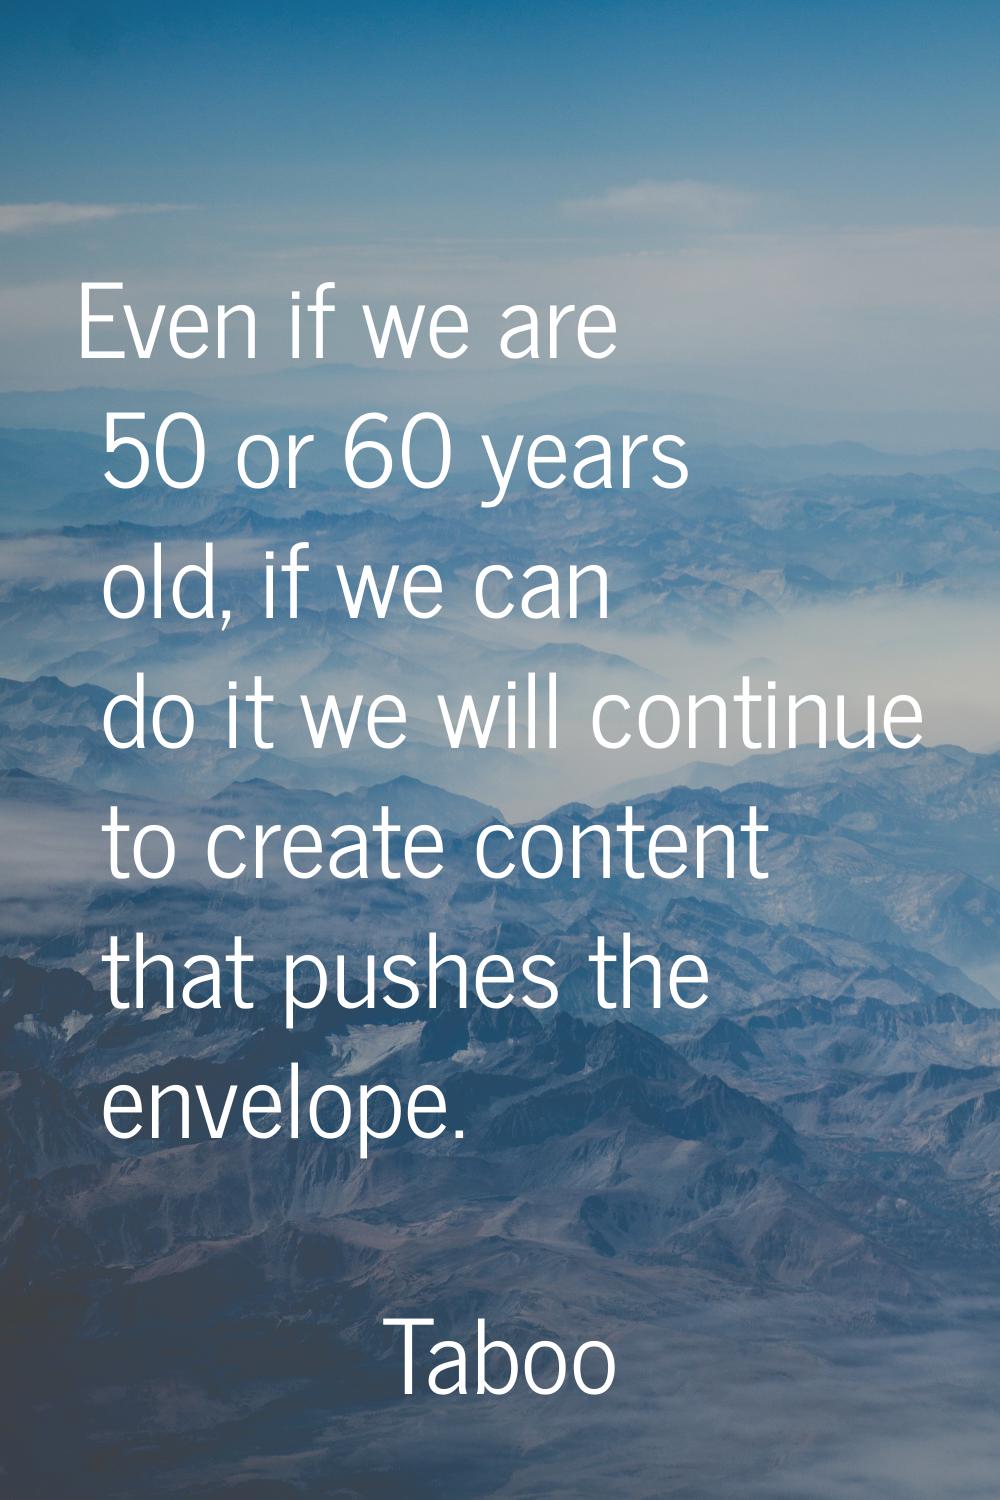 Even if we are 50 or 60 years old, if we can do it we will continue to create content that pushes t